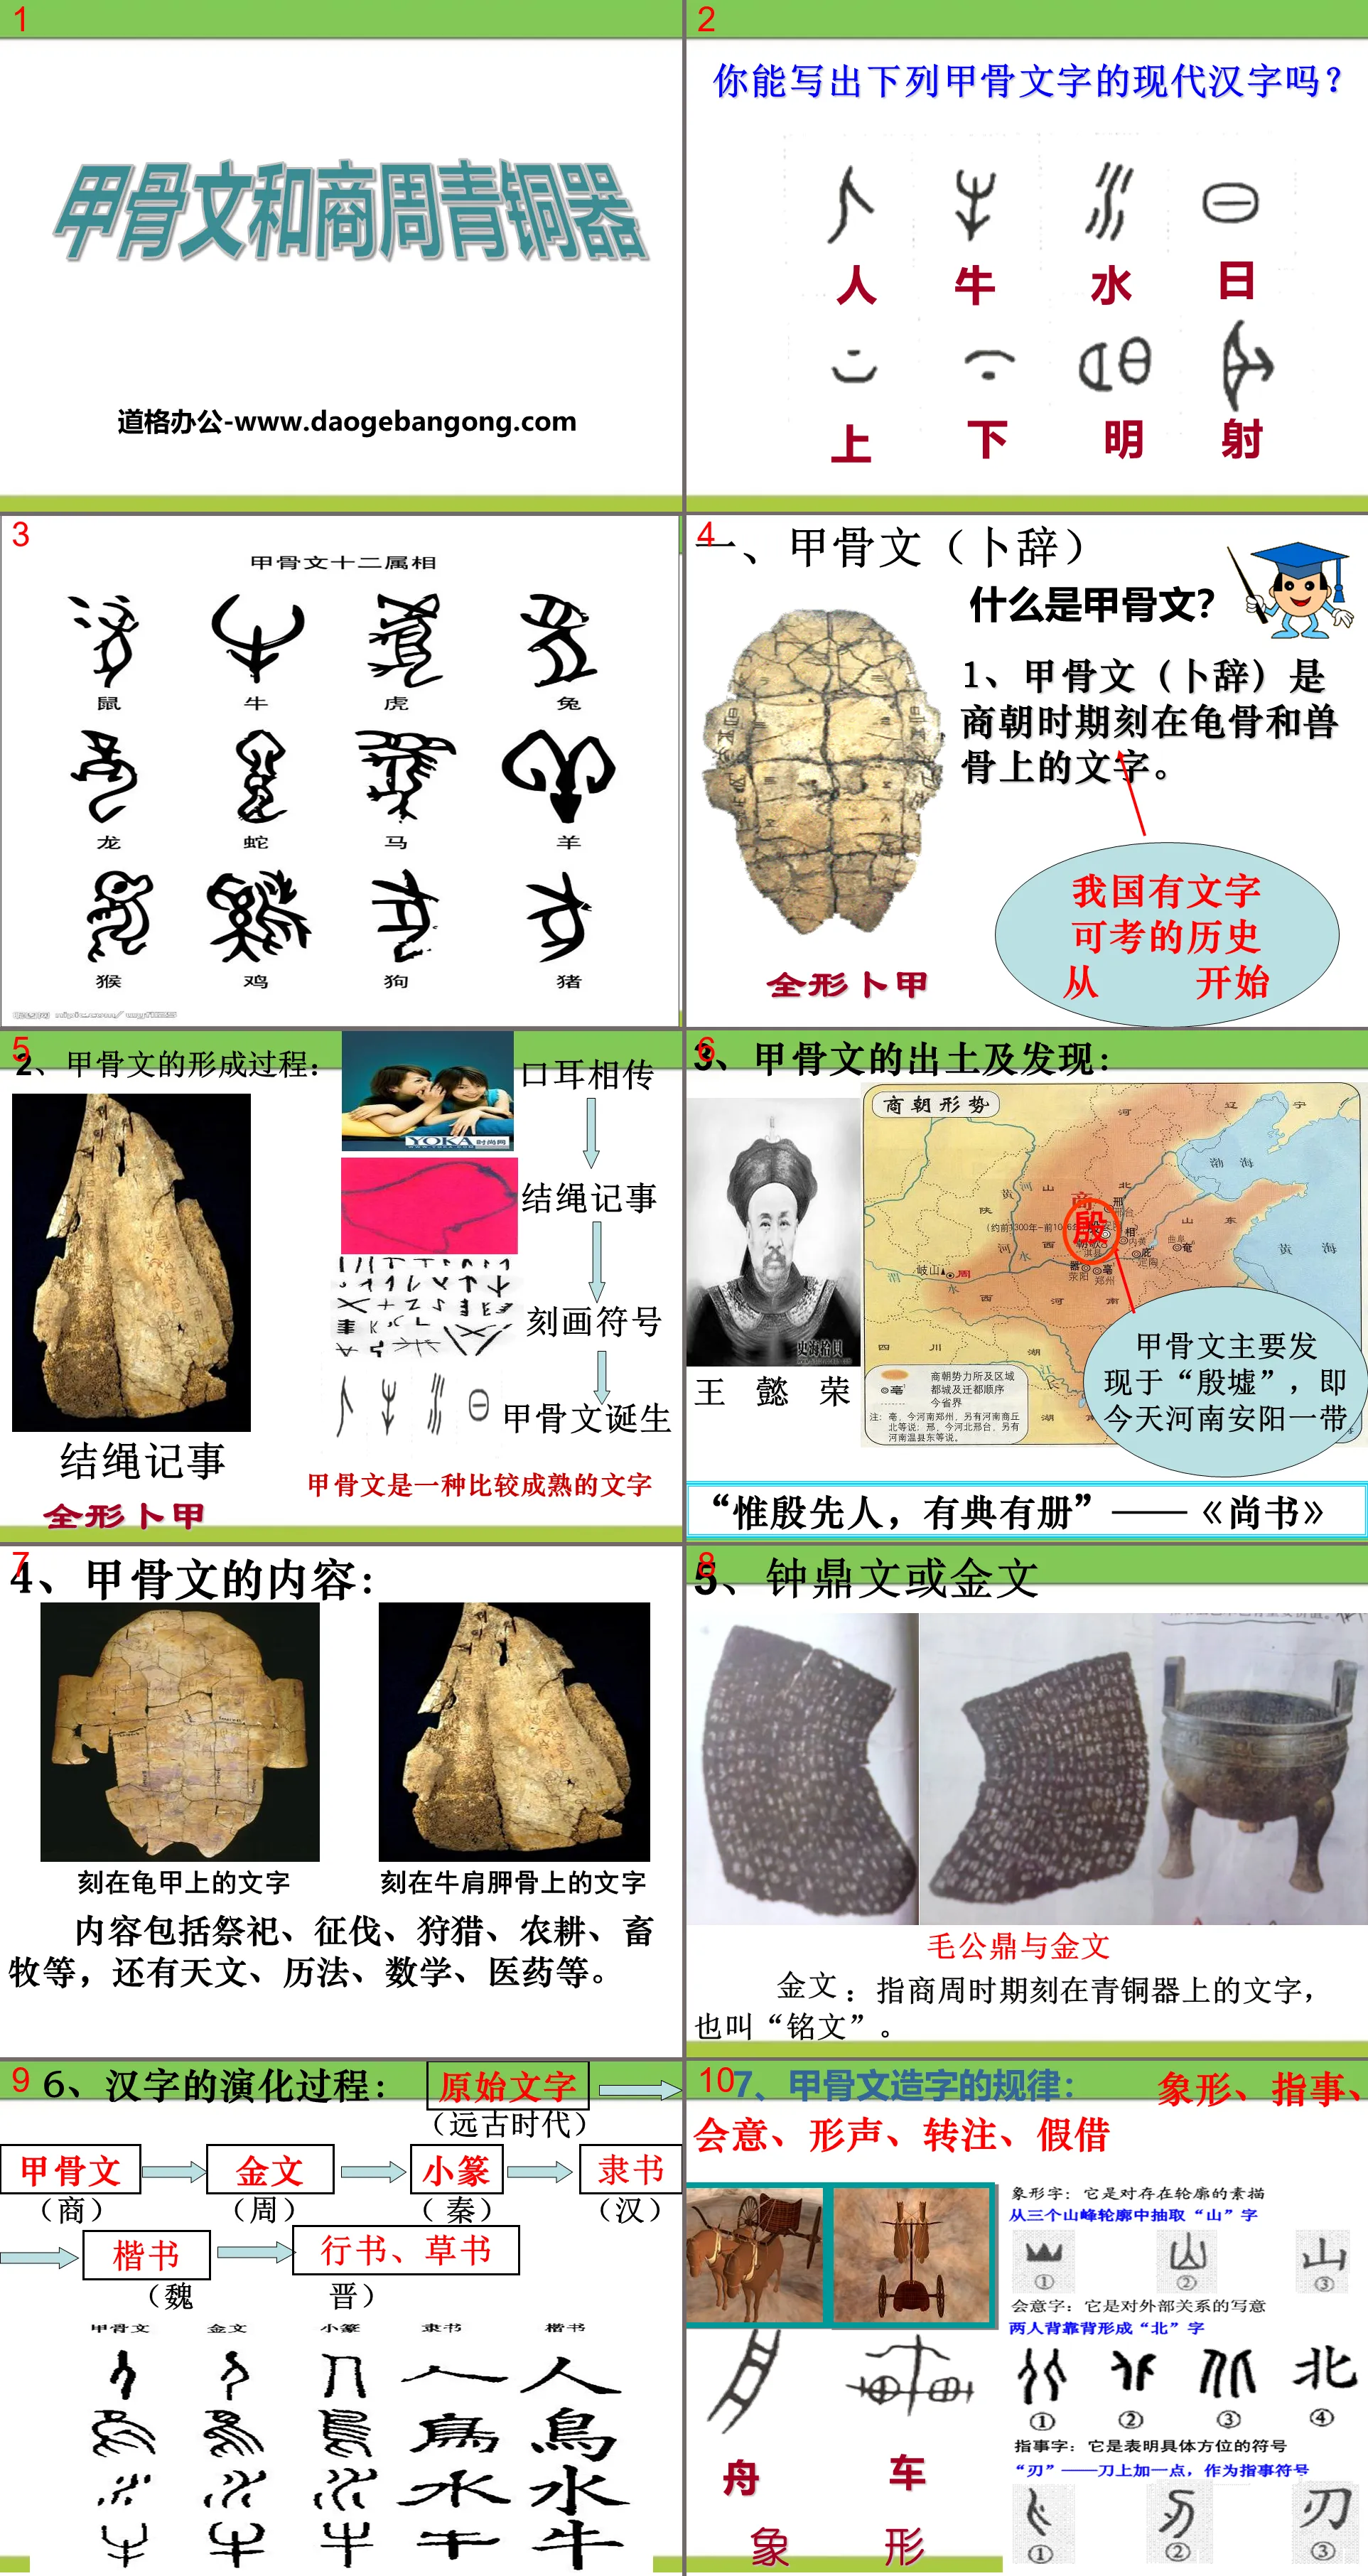 "Oracle Bone Inscriptions and Shang and Zhou Bronze Wares" The emergence of the state and social changes - Xia, Shang and Zhou PPT courseware 2